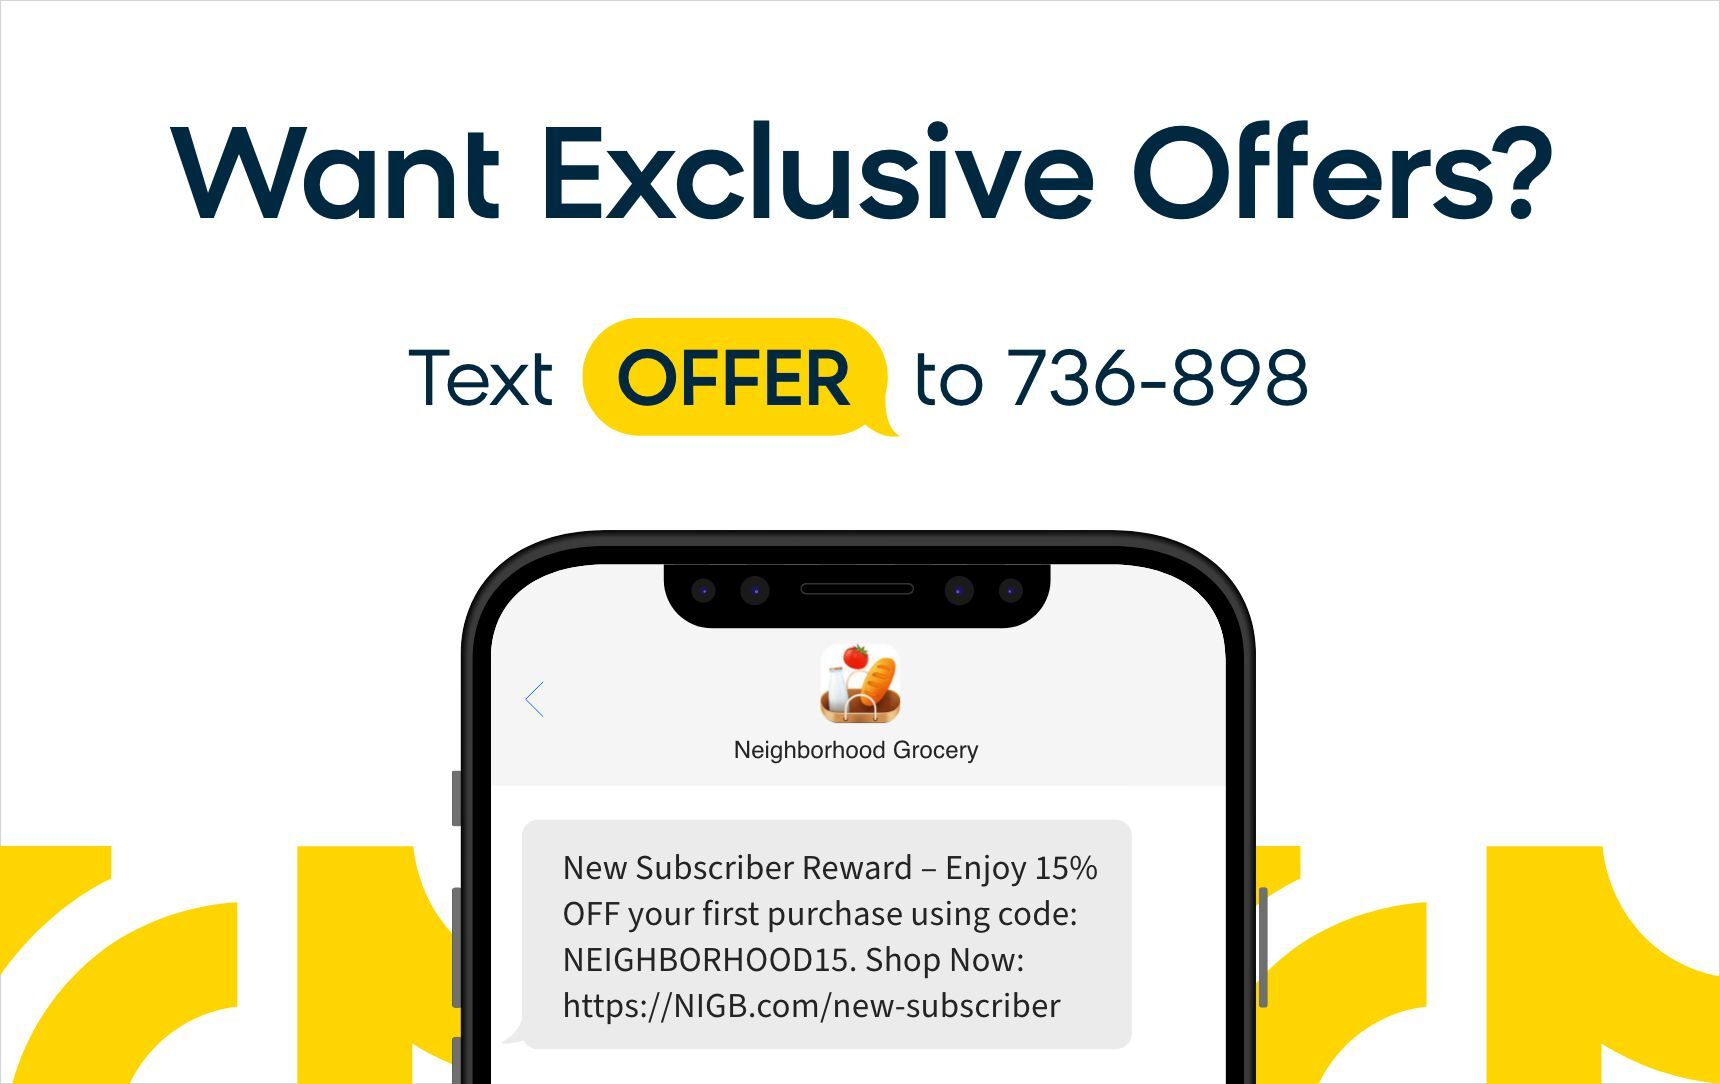 A marketing message highlighting a short code that gives customers exclusive offers.